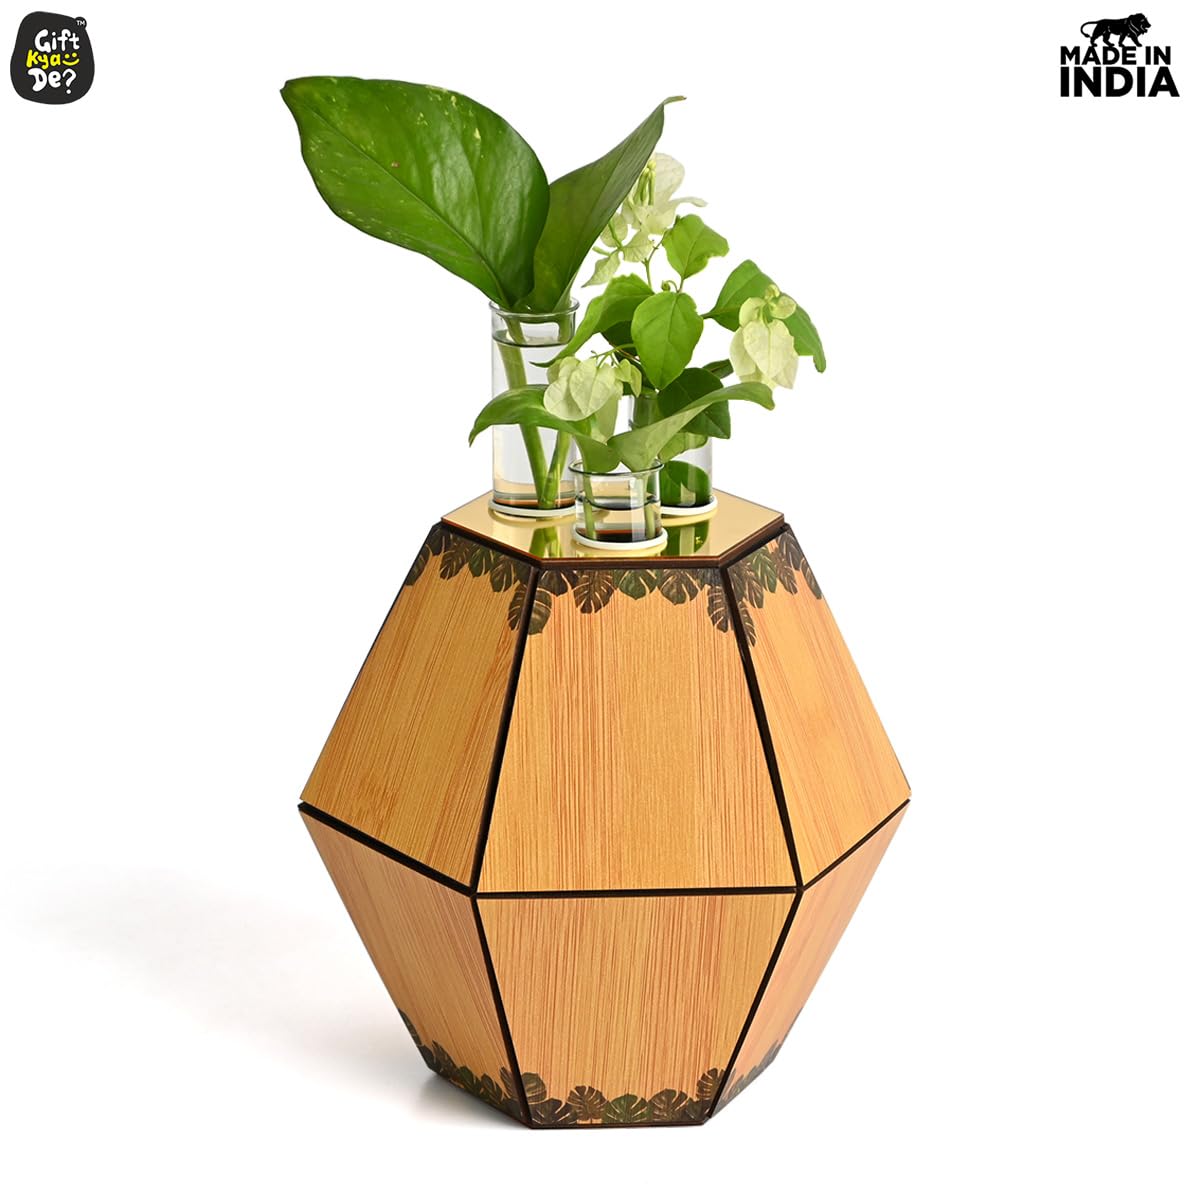 Test Tube Planter with Wooden Holder, Table Top Decor planters for Living Room Hexagon Design Corporate Gifts for Home/Office